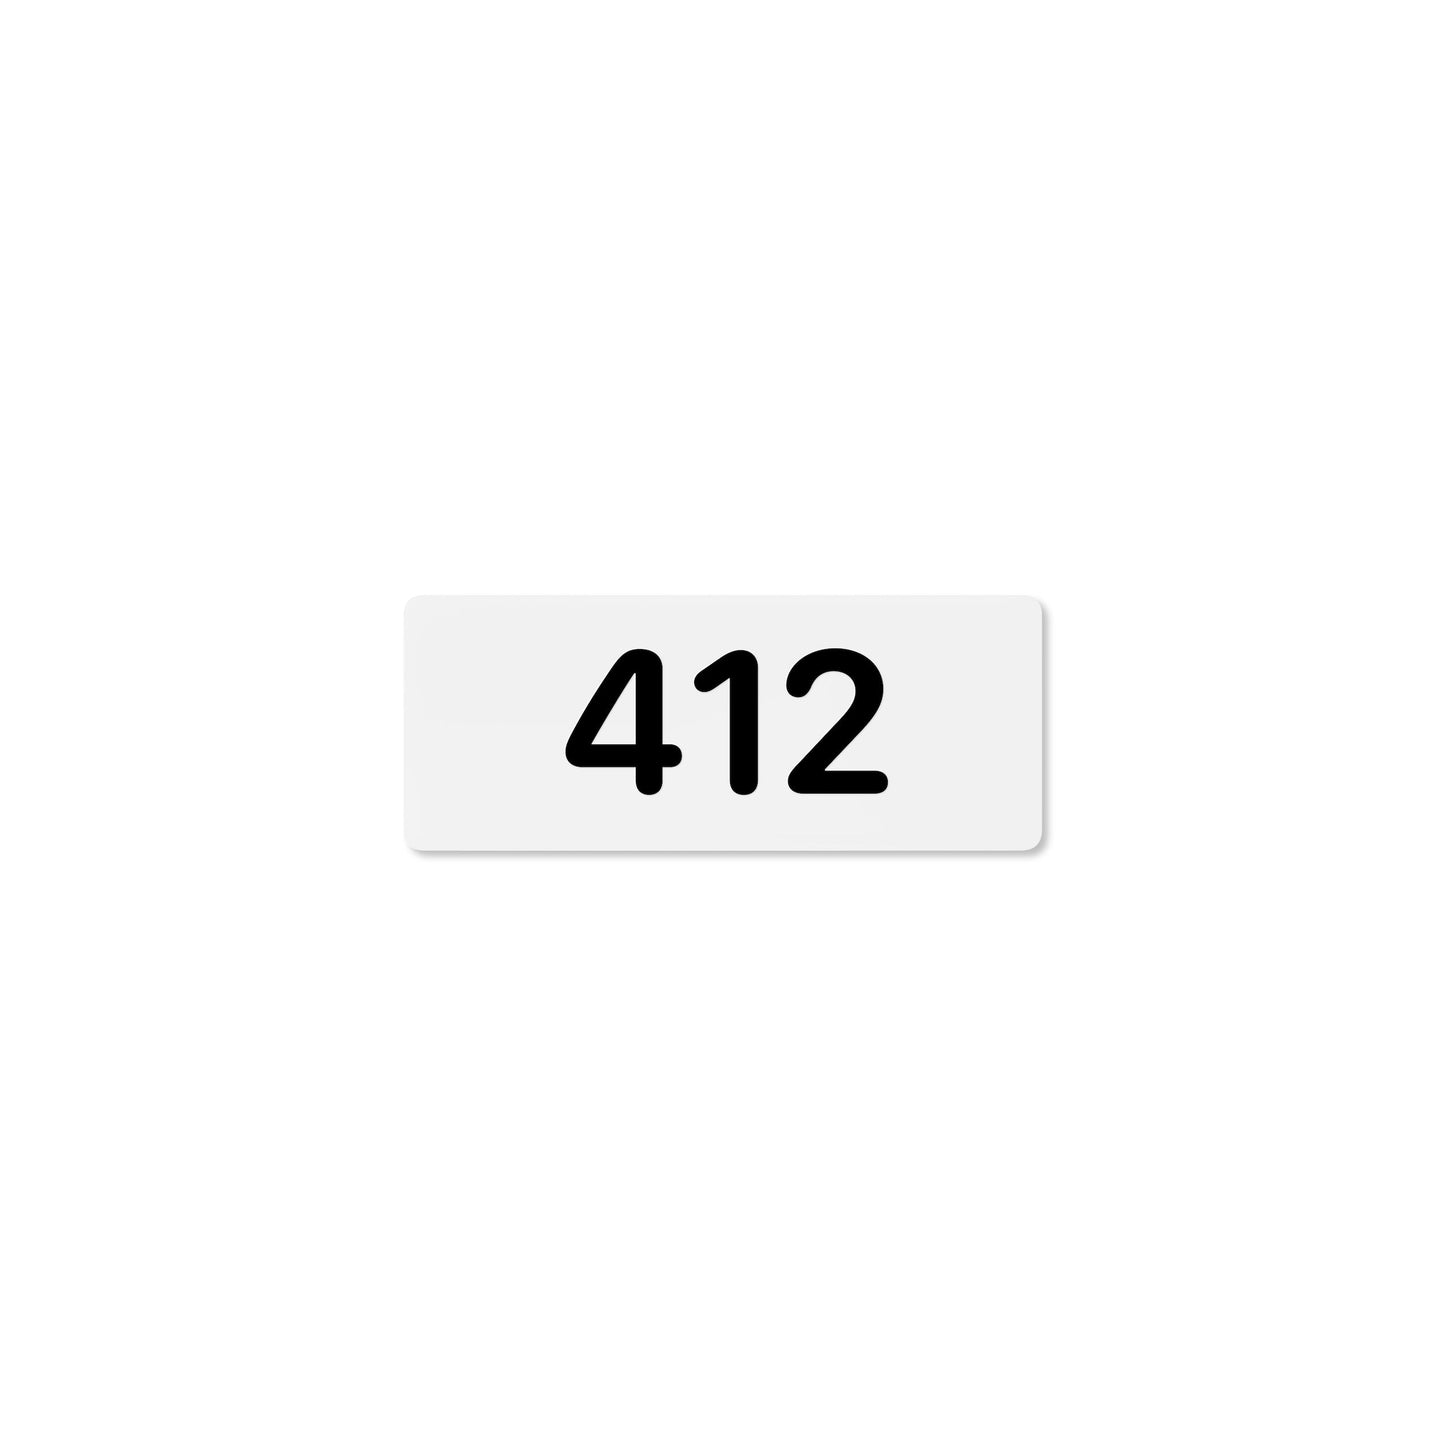 Numeral 412